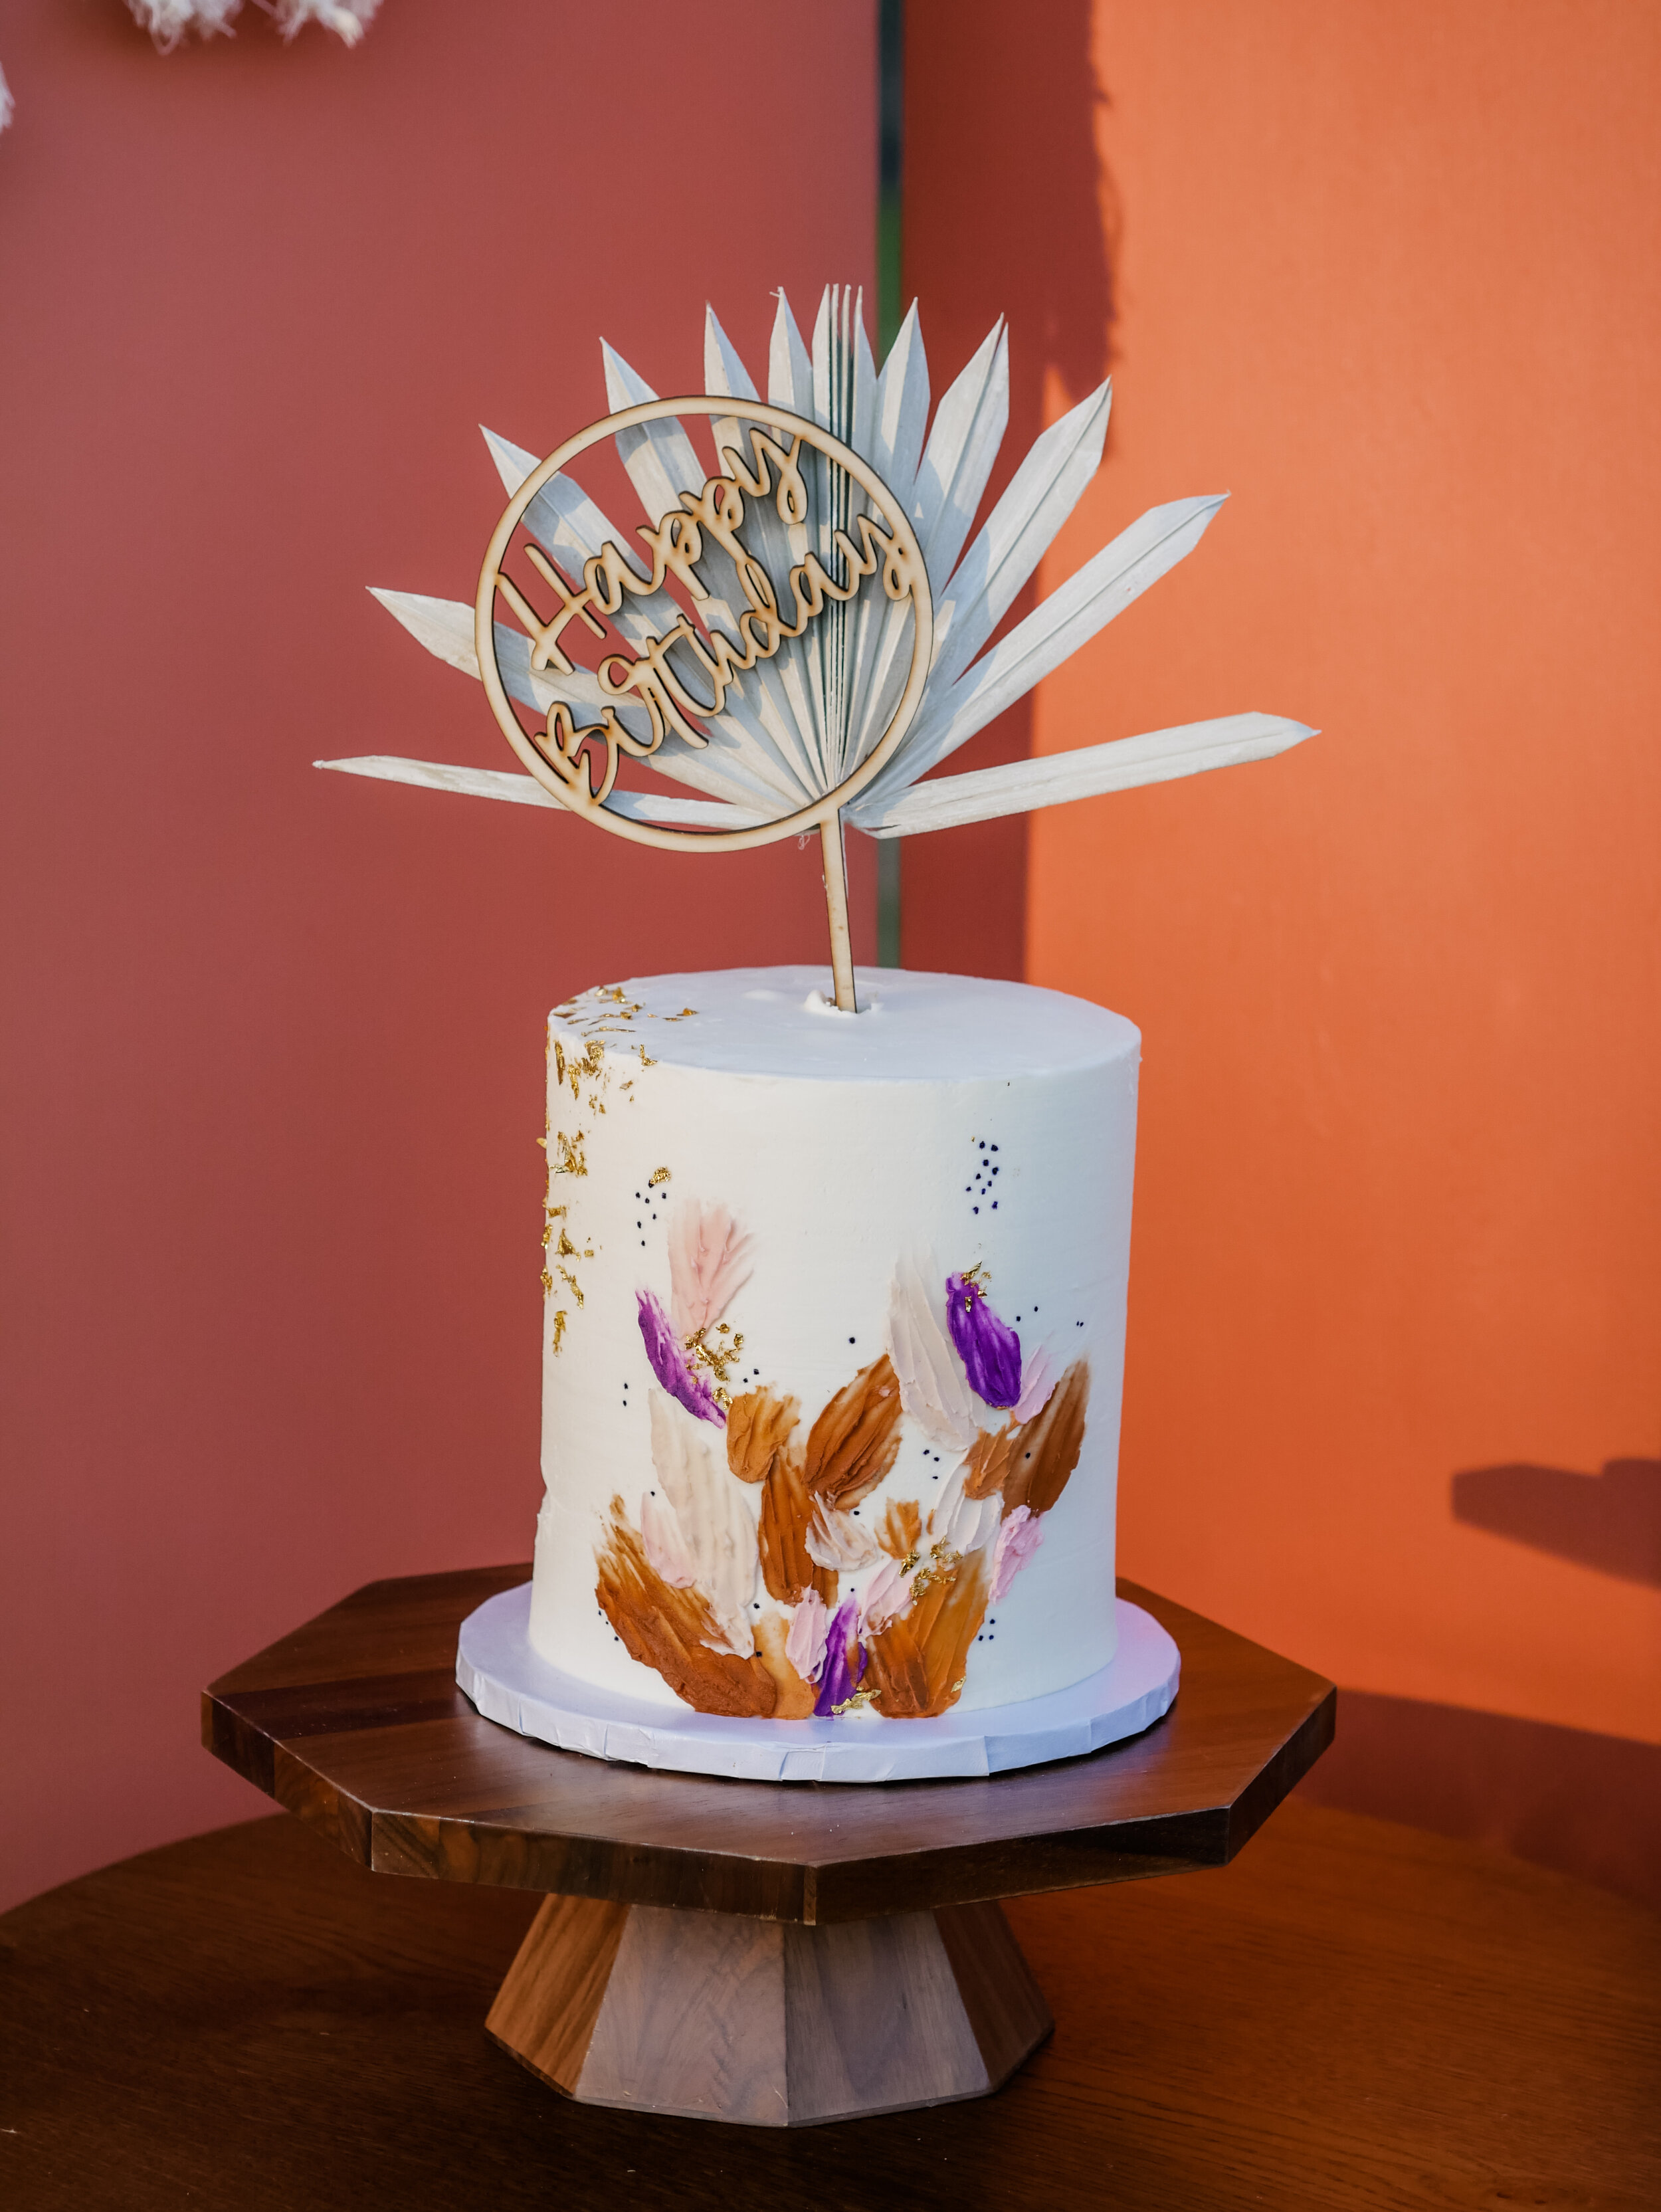  Boho Chic Birthday Cake for a luxury backyard Glamping experience - with large rentable tent and picnic area from MINT Event Design in Austin, TX! Perfect for teen slumber parties, birthday parties, or bachelorette parties. See how event designer Ca